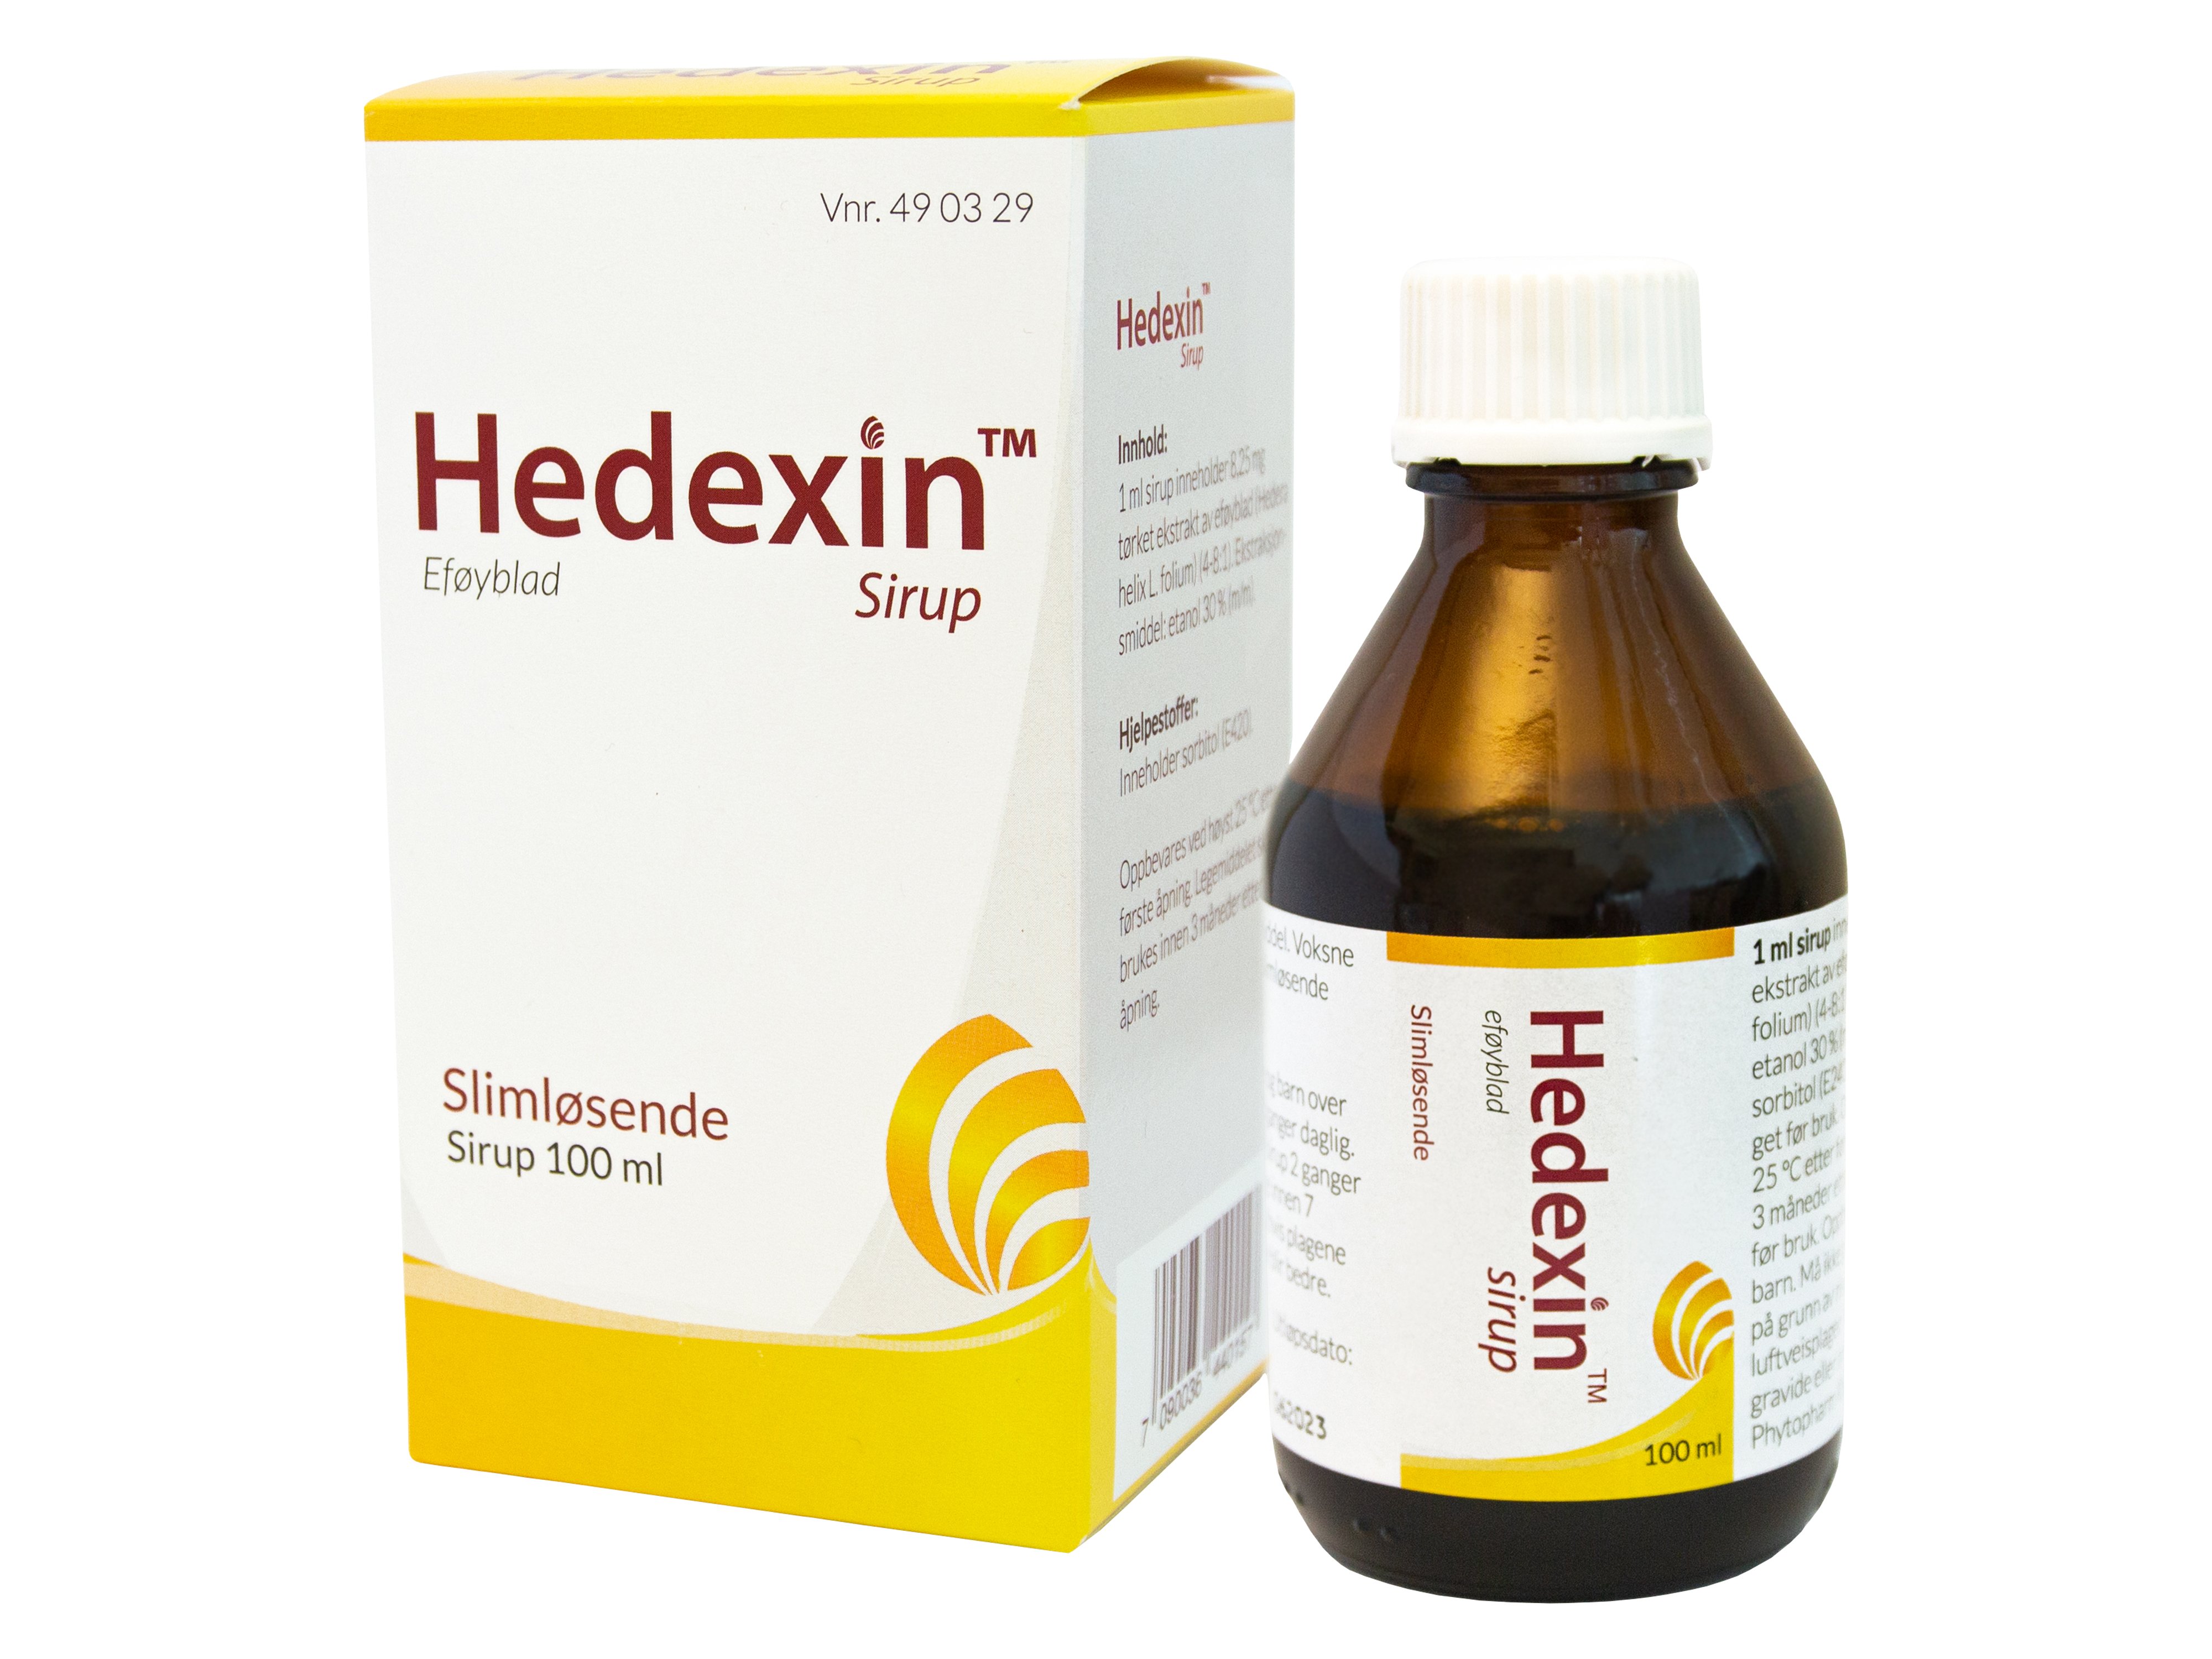 Hedexin Sirup, 100 ml.